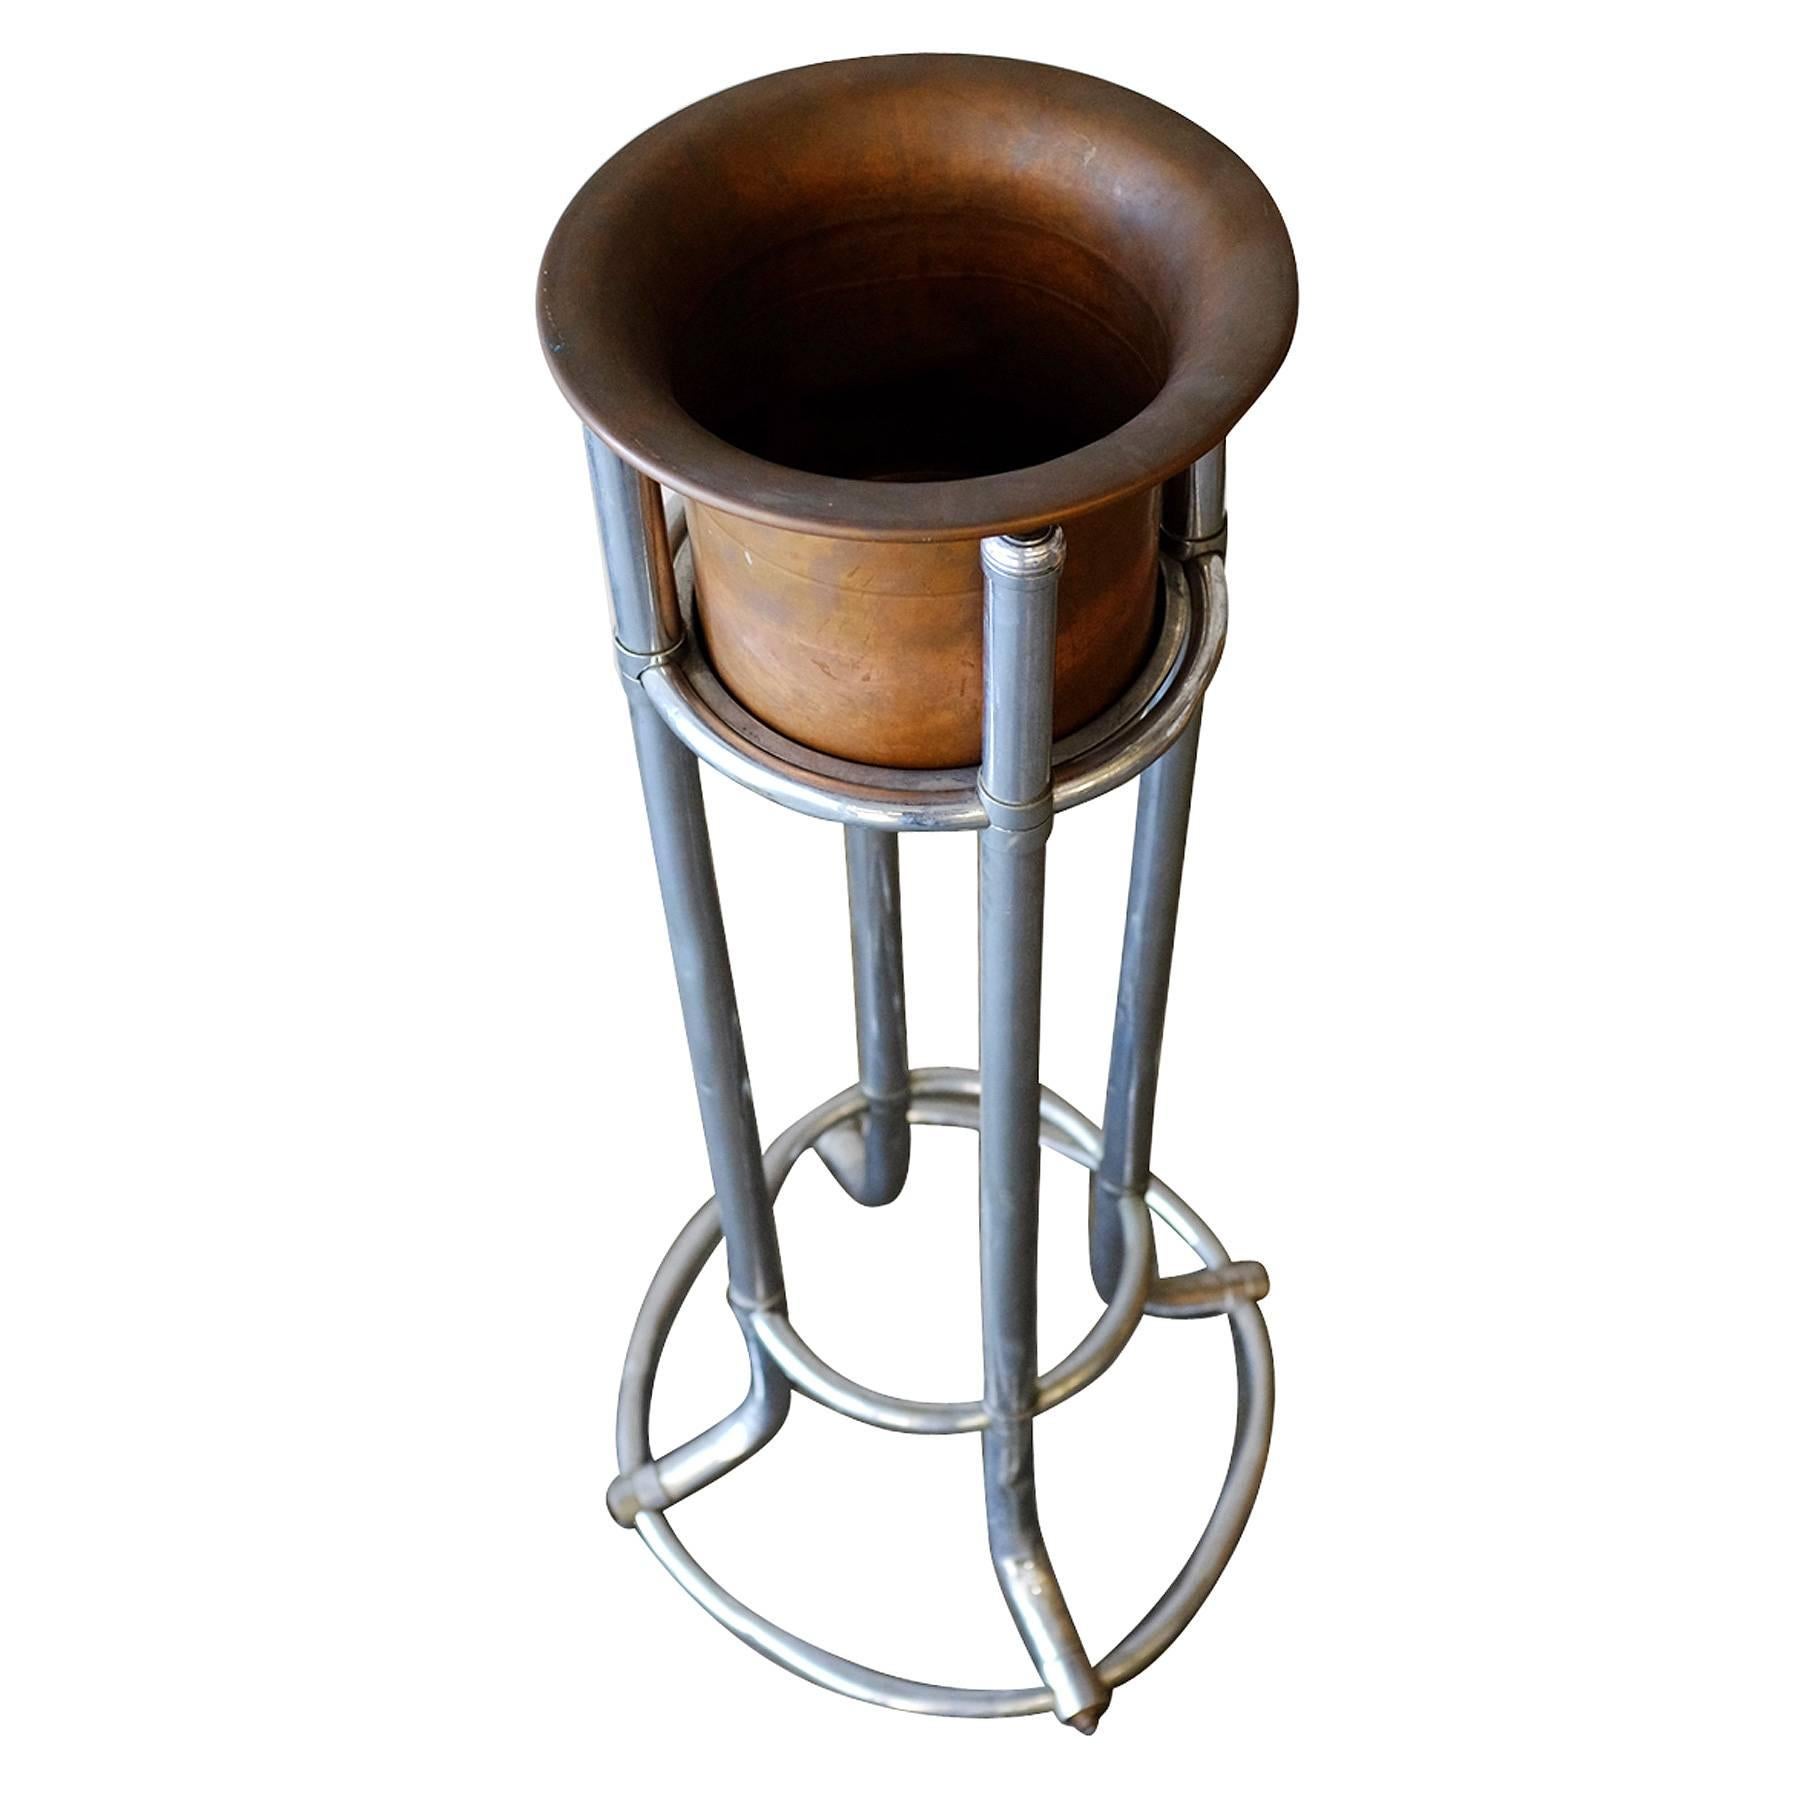 This champagne ice bucket stand is from the original Ambassador Hotel in Los Angeles, circa 1921. Featuring a chromed steel bucket stand and a copper ice bucket. 

These were used in the hotel dining room and in the Coconut Grove, a famous hang